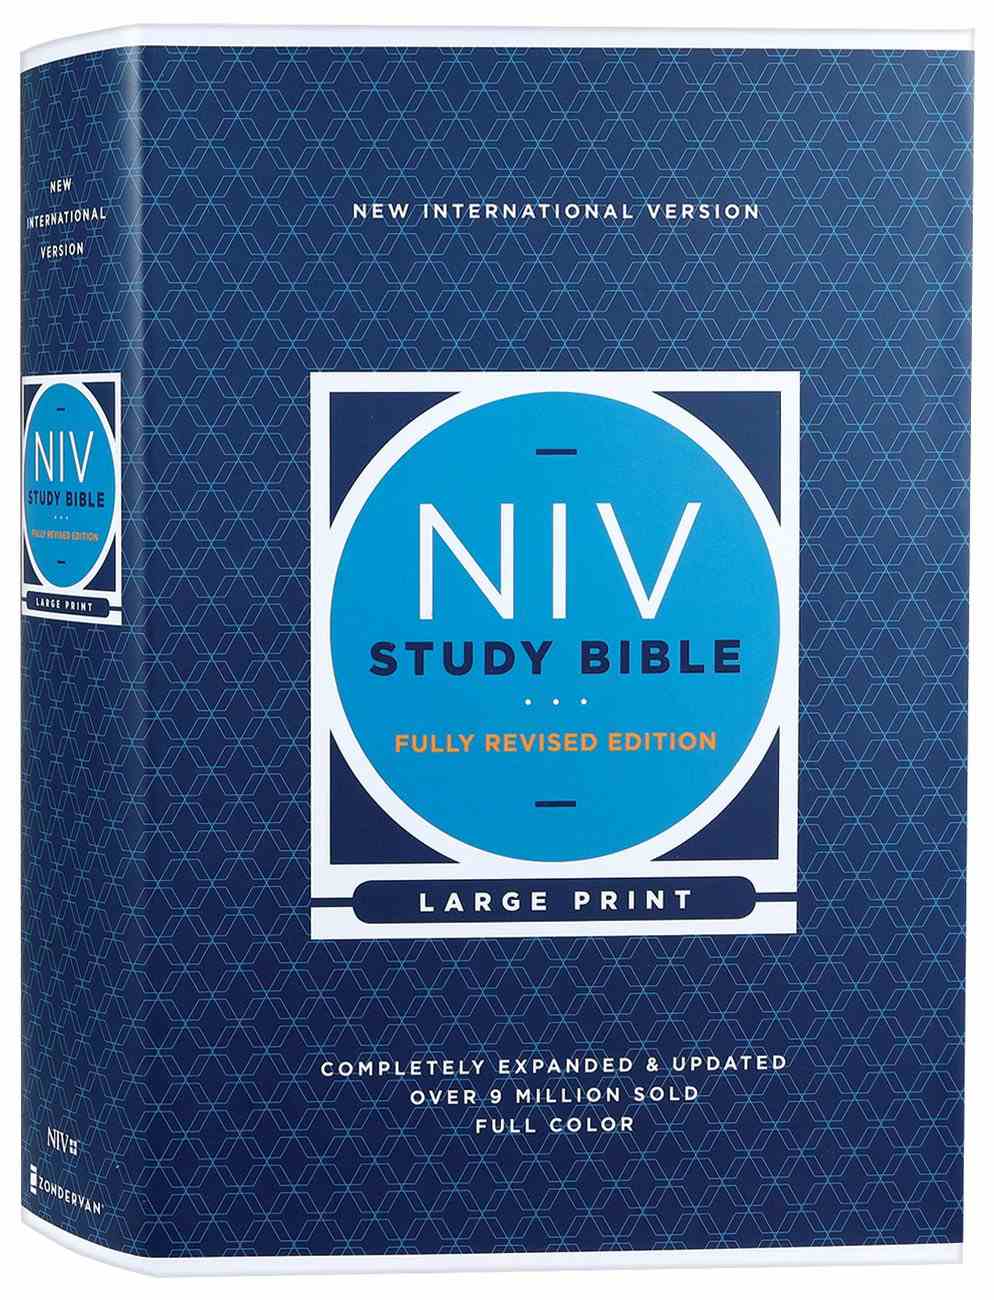 niv-study-bible-large-print-red-letter-edition-fully-revised-edition-2020-by-michael